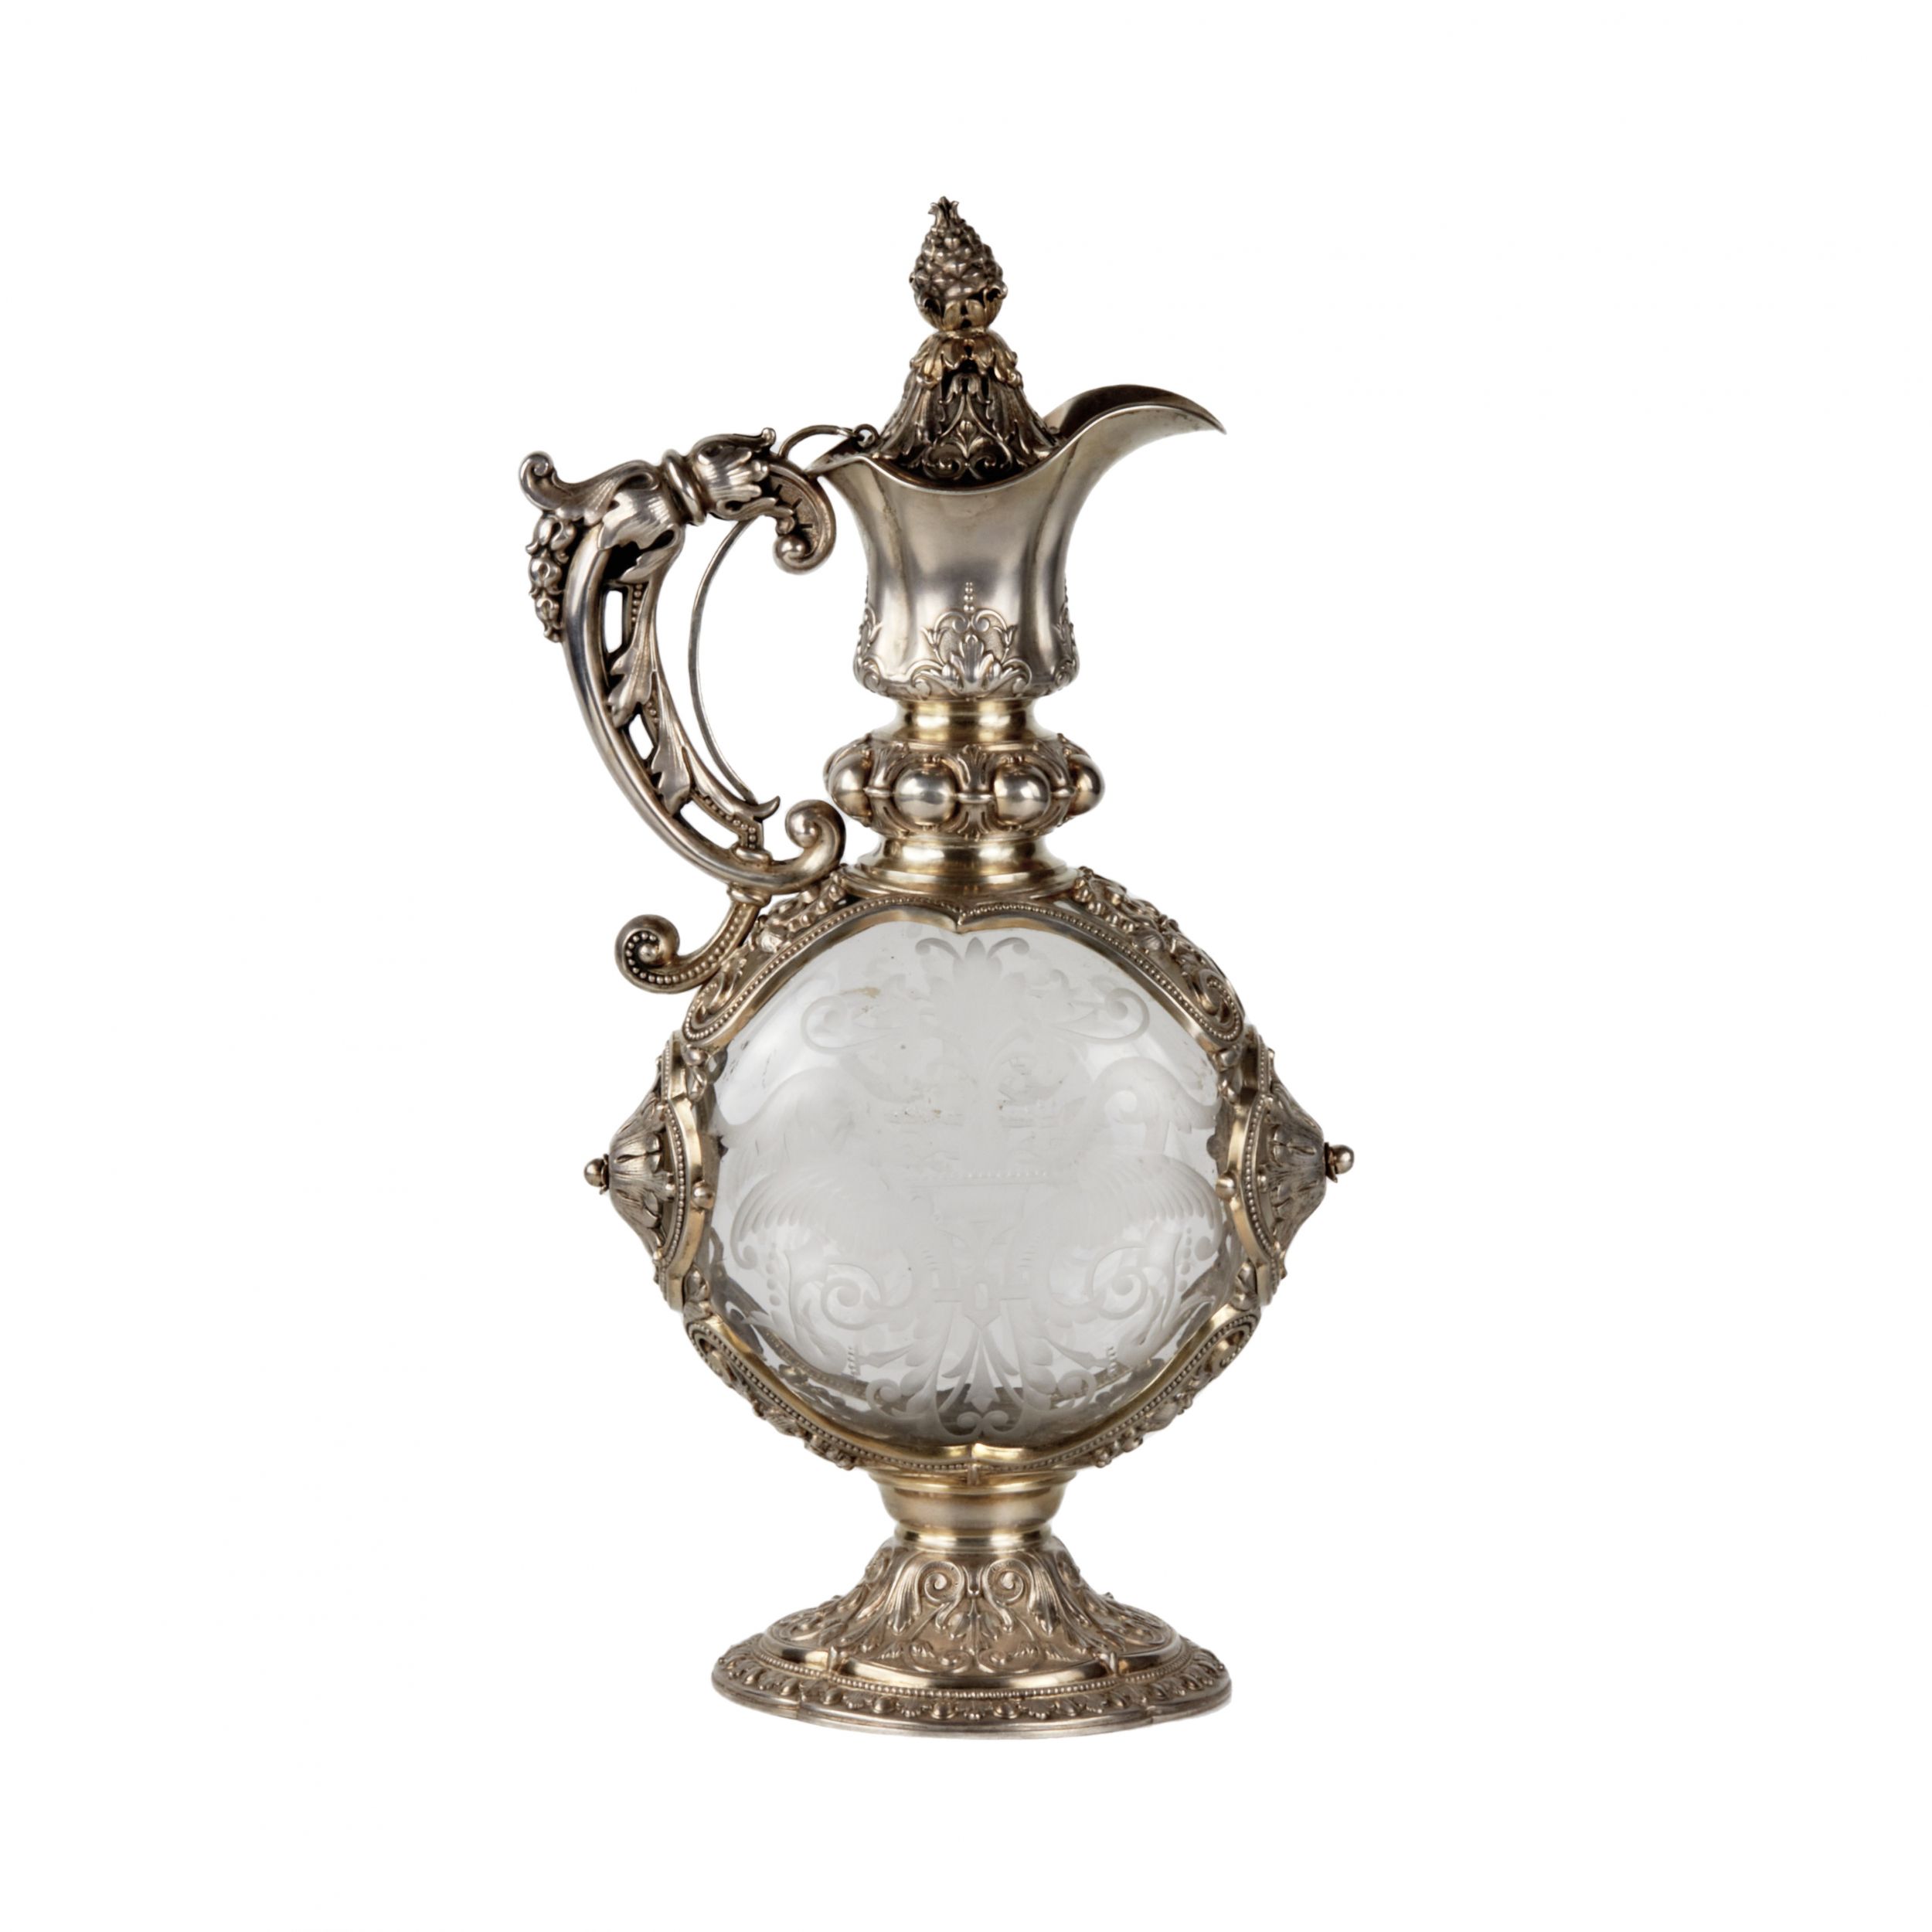 Magnificent-silver-jug-with-engraved-glass-Neo-Renaissance-style